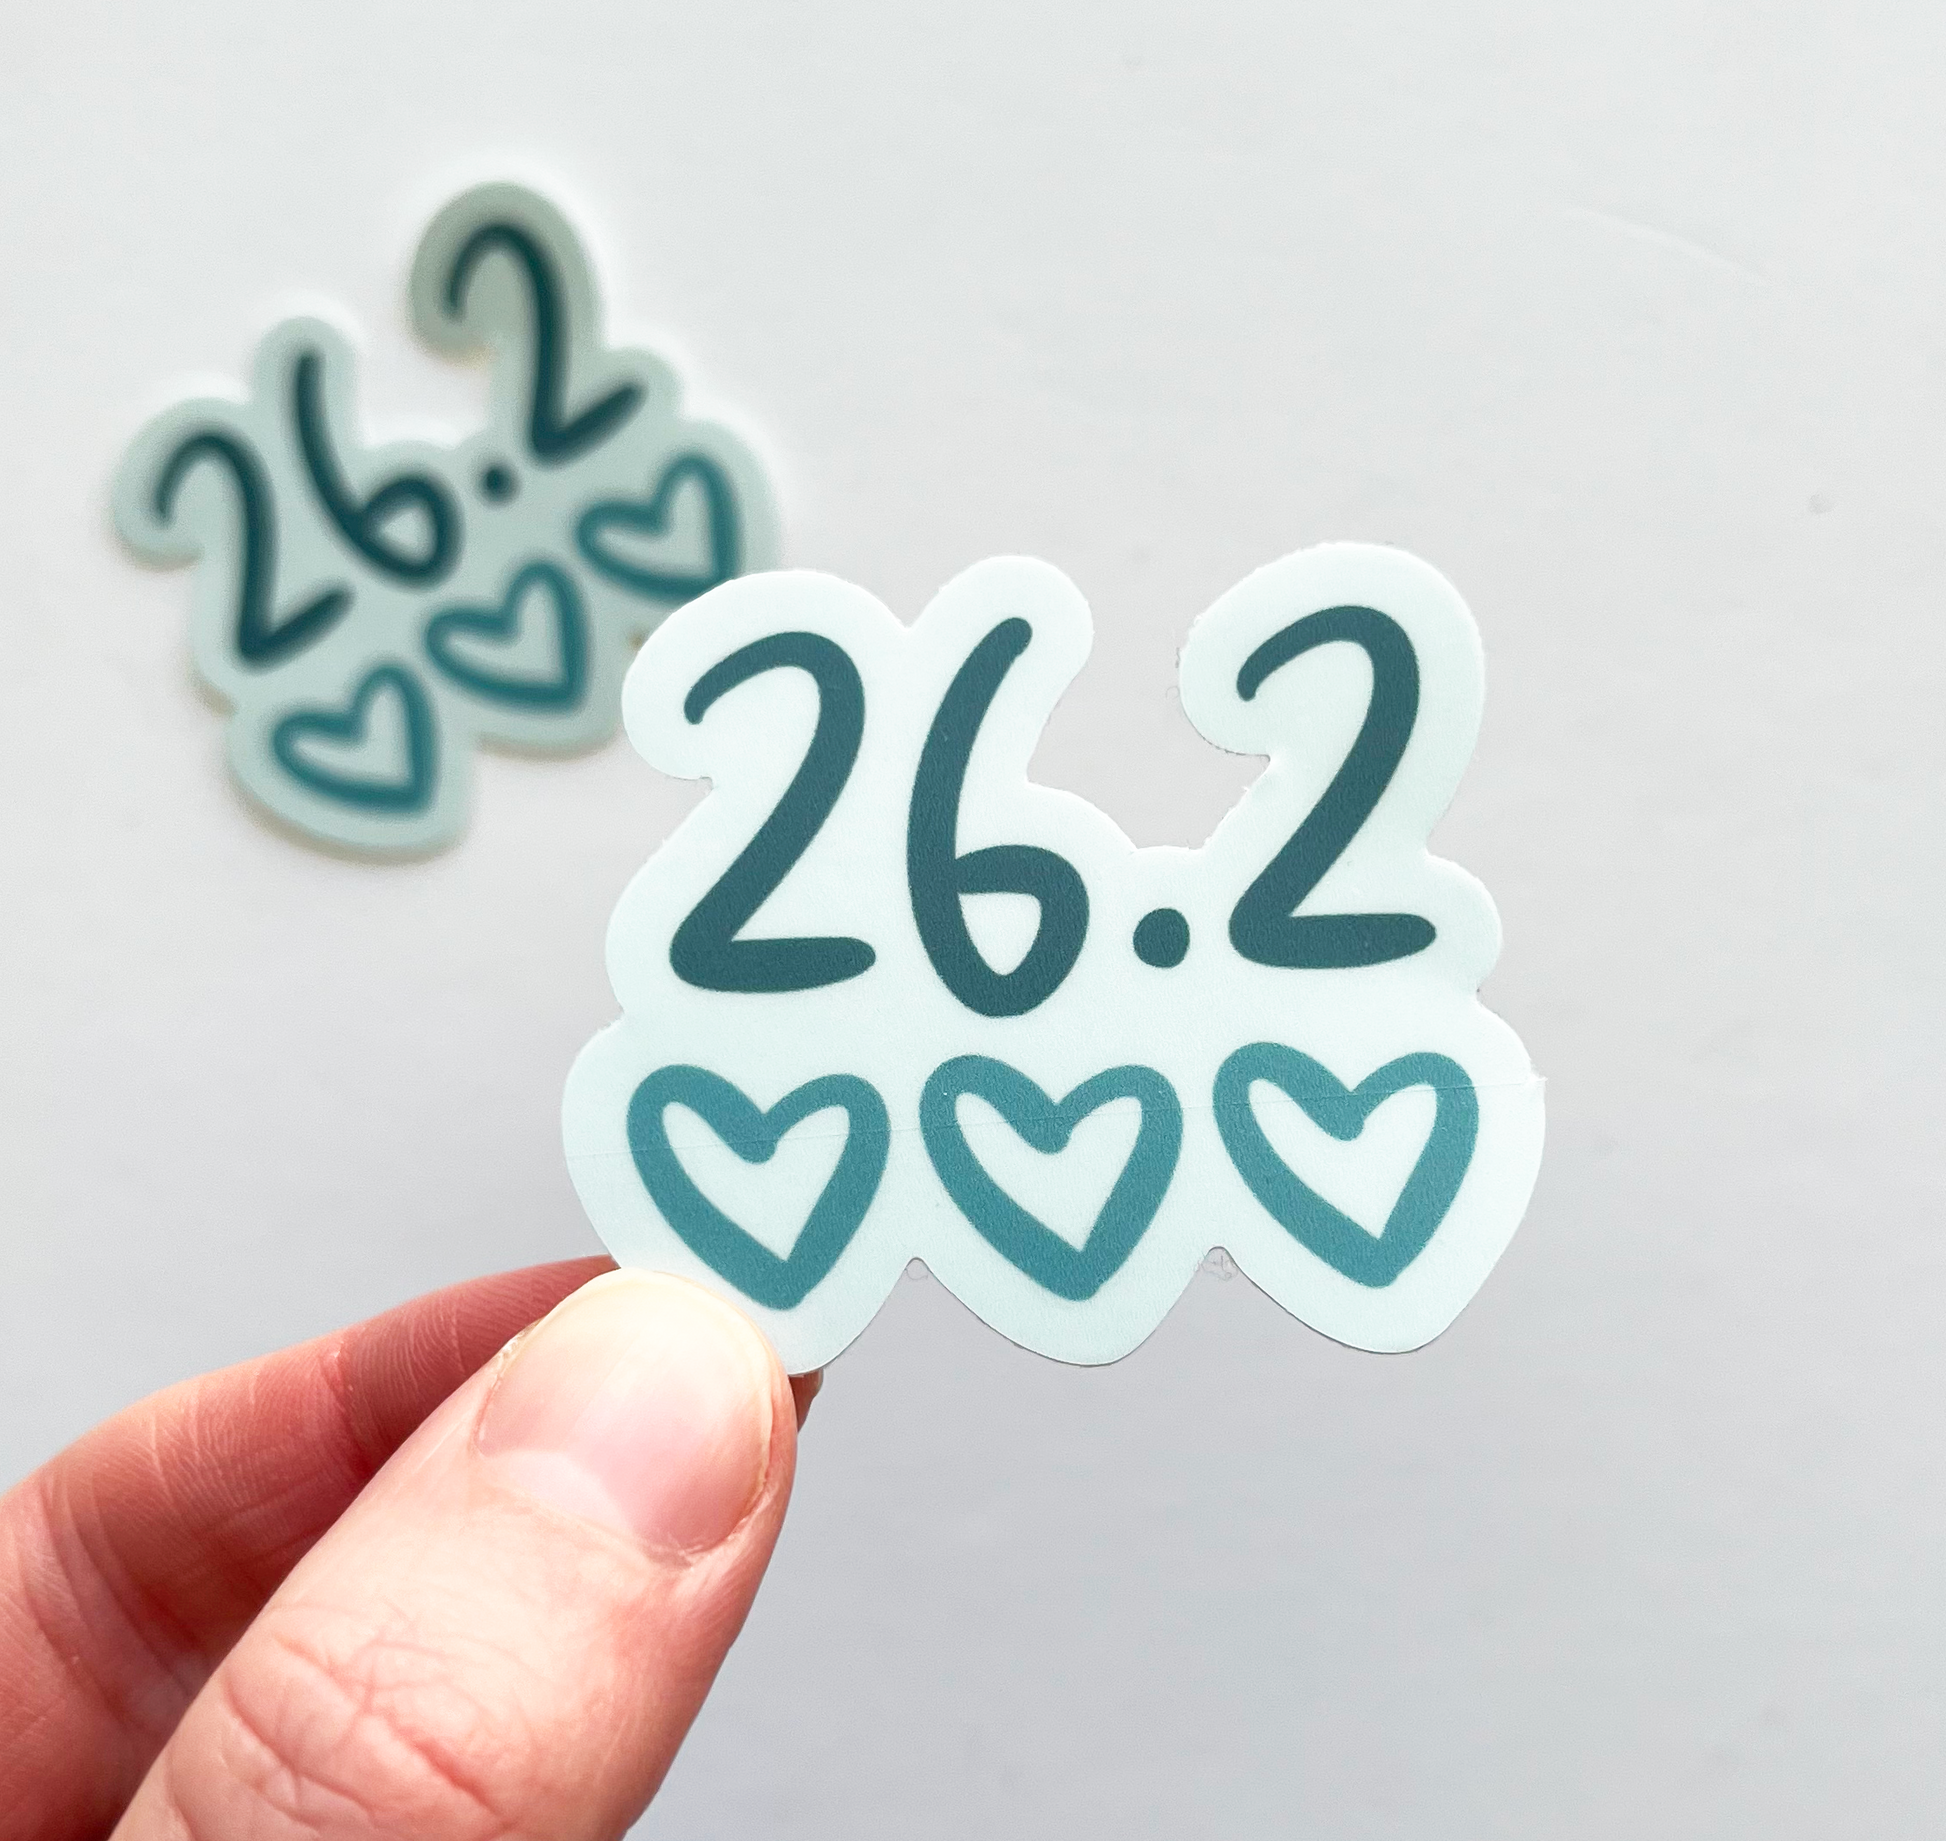 Sticker saying 26.2 with 3 hearts below in blue and teal colors. 